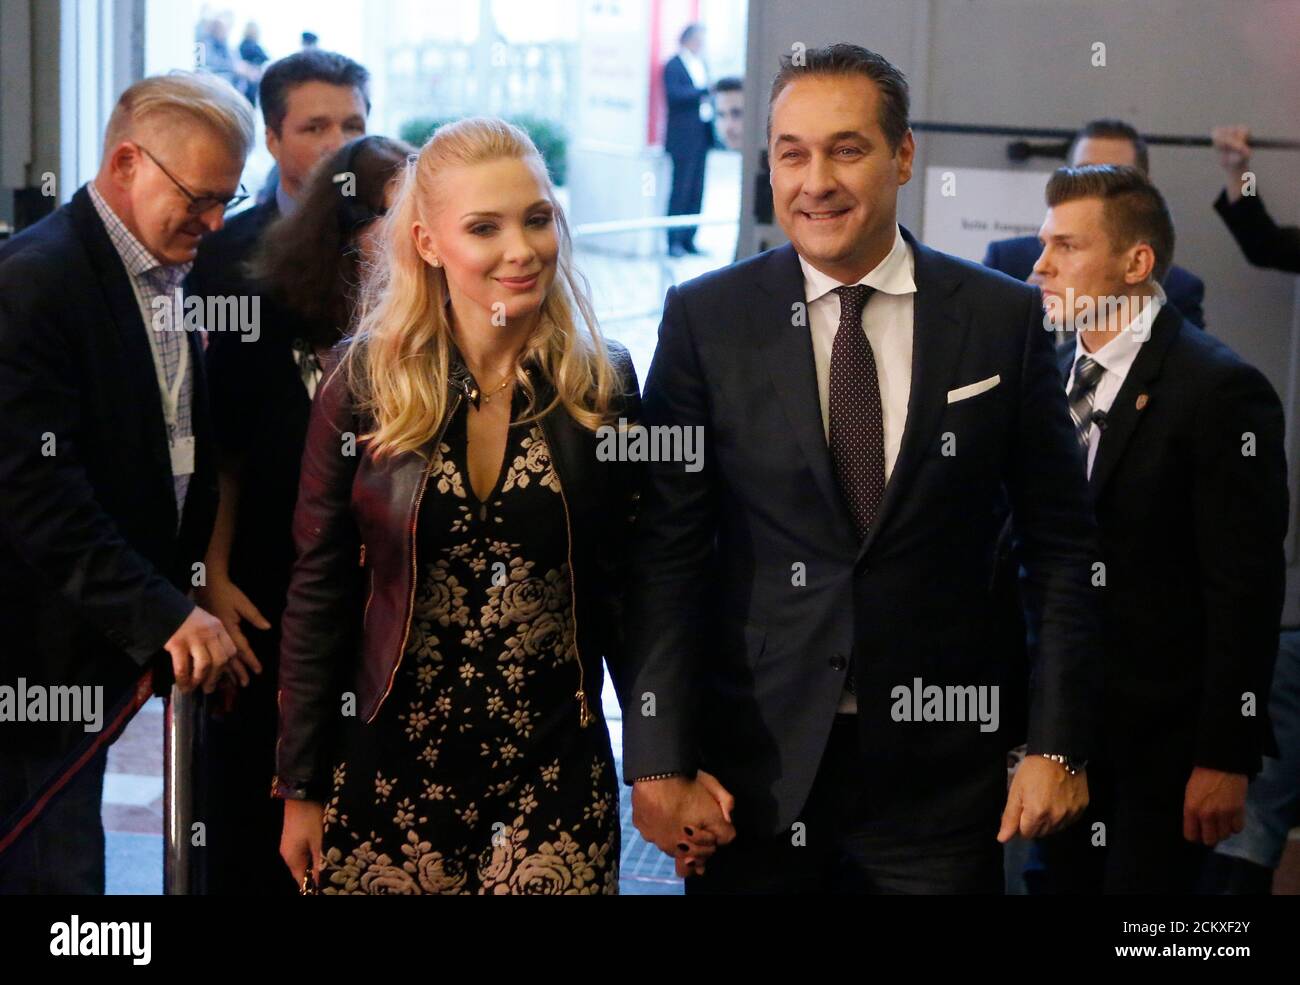 Top candidate and head of far-right Freedom Party (FPOe) Heinz-Christian  Strache and his wife Philippa Beck arrive for first TV statements after  Austria's general election in Vienna, Austria, October 15, 2017.  REUTERS/Heinz-Peter